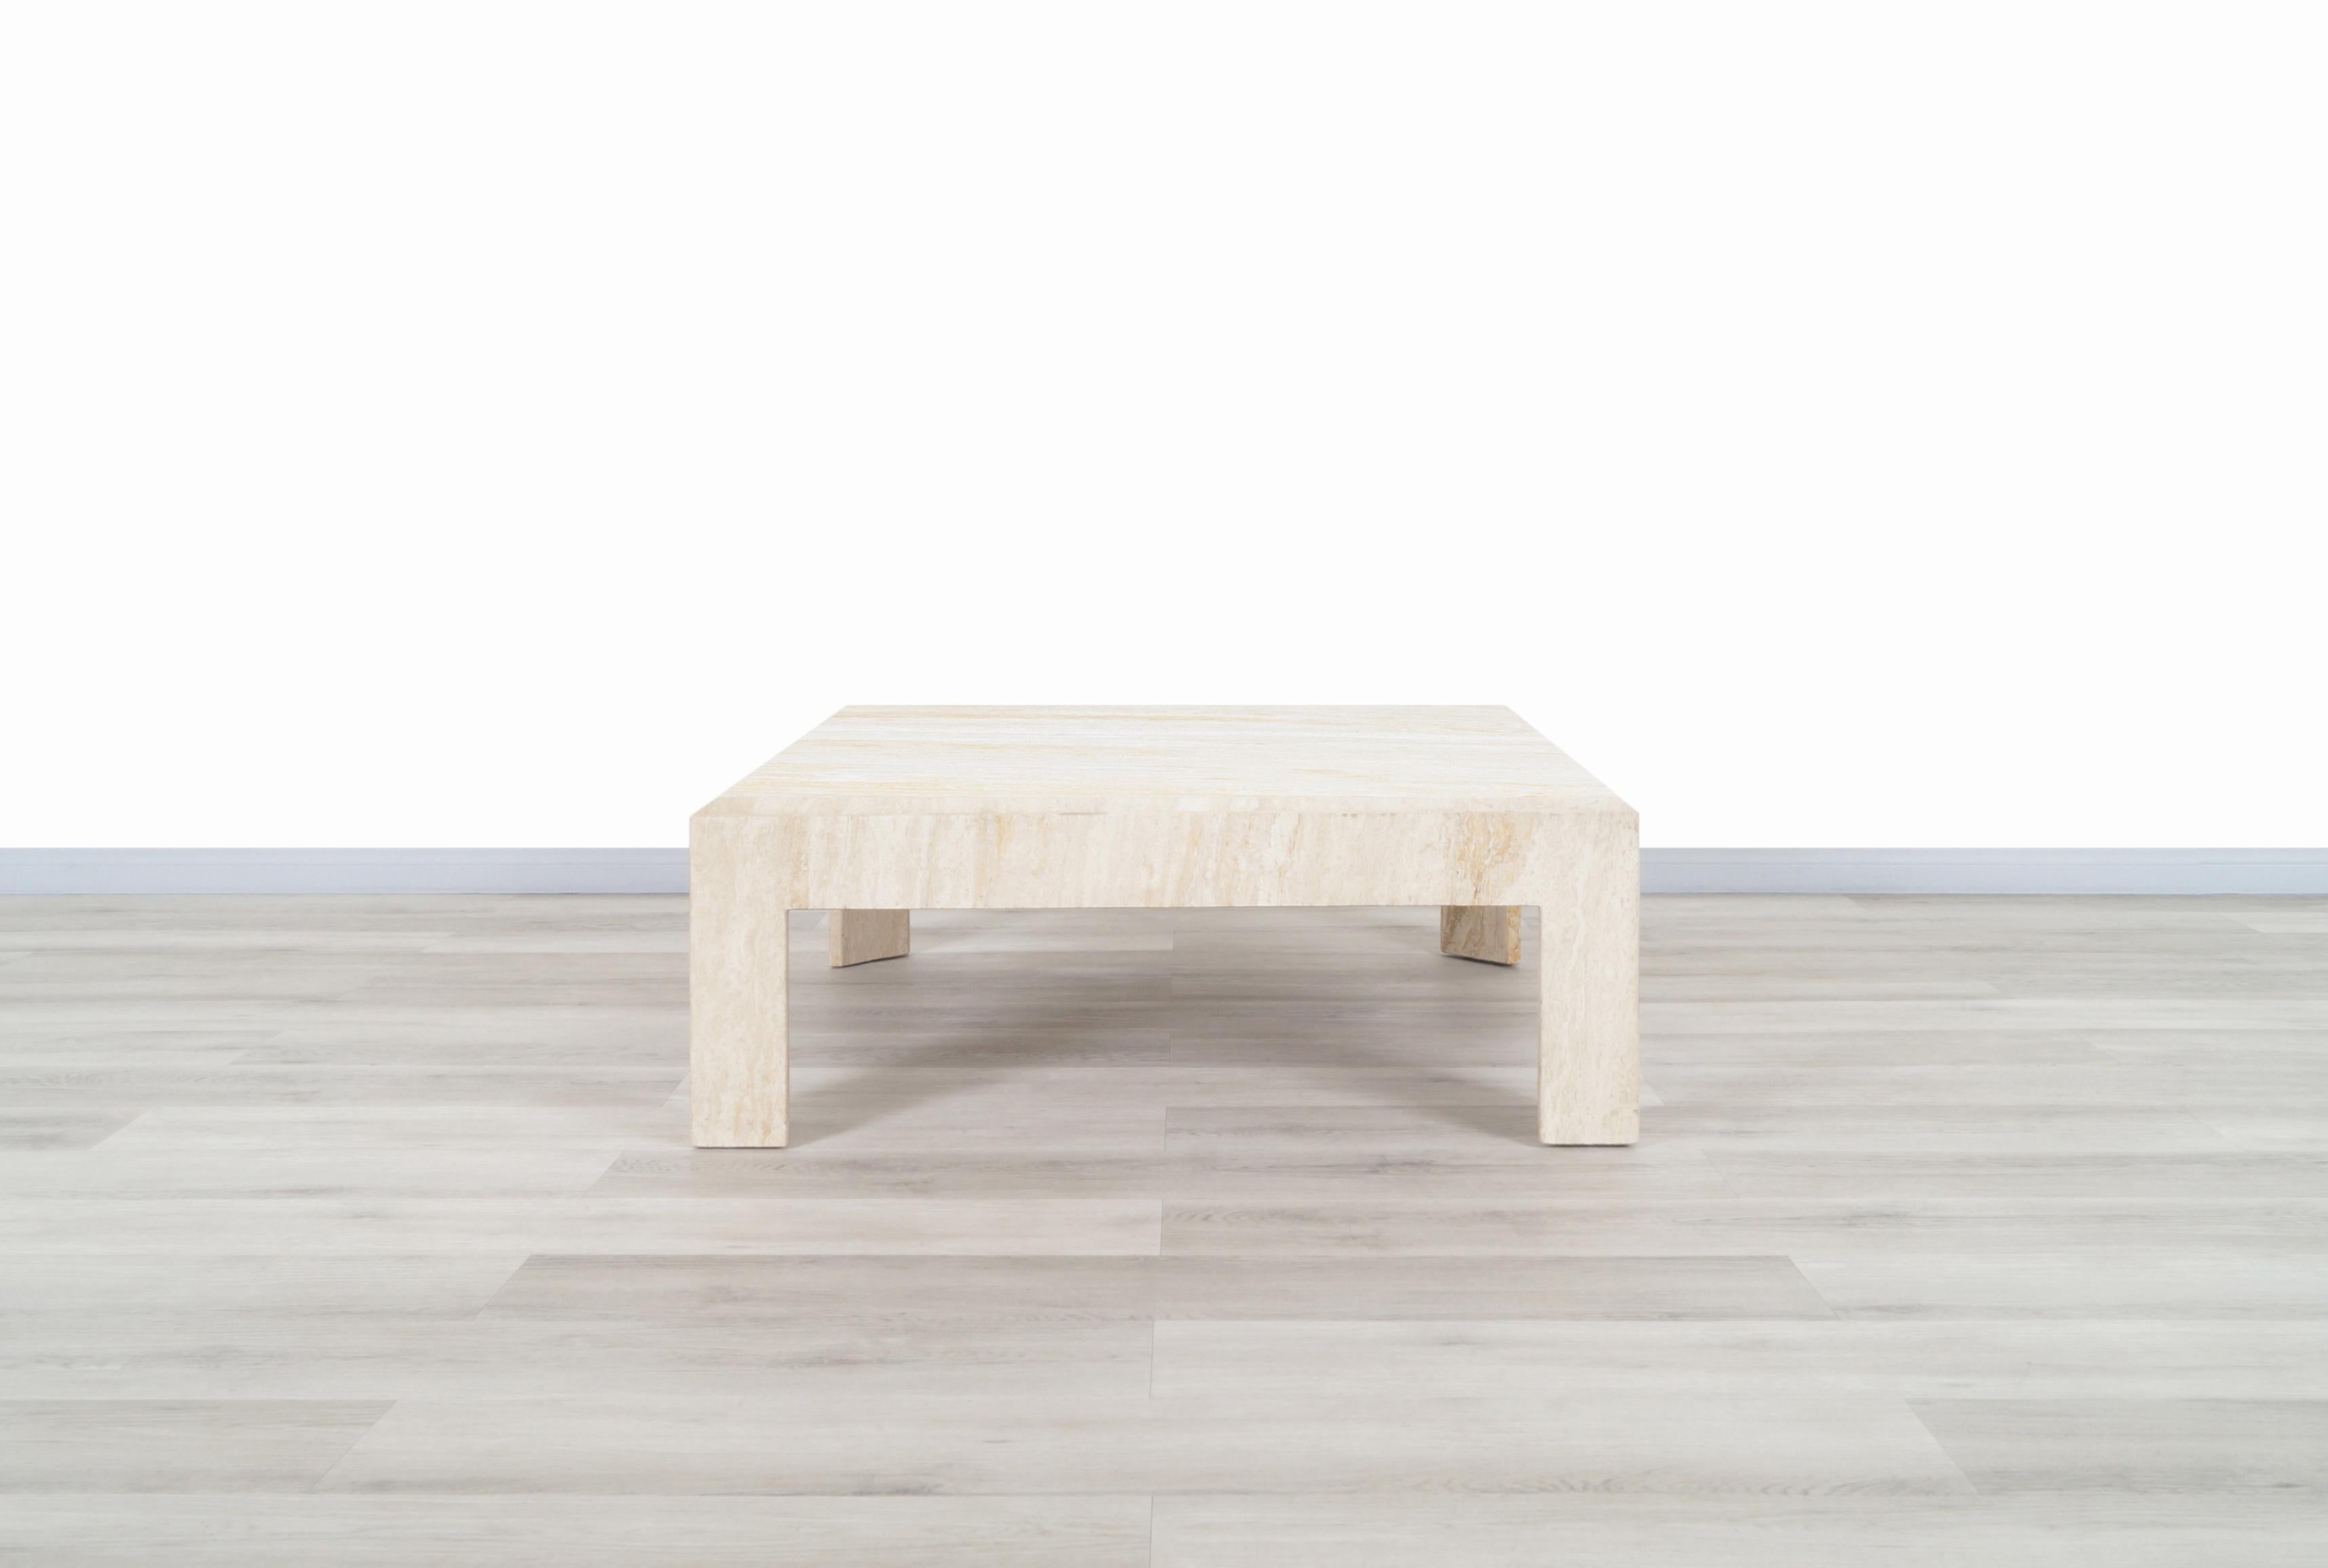 A stunning vintage travertine coffee table designed and manufactured in Italy. The modernist design is perfectly complemented by the natural minerals that creates the travertine stone. The table features a beautiful travertine top with Minimalist